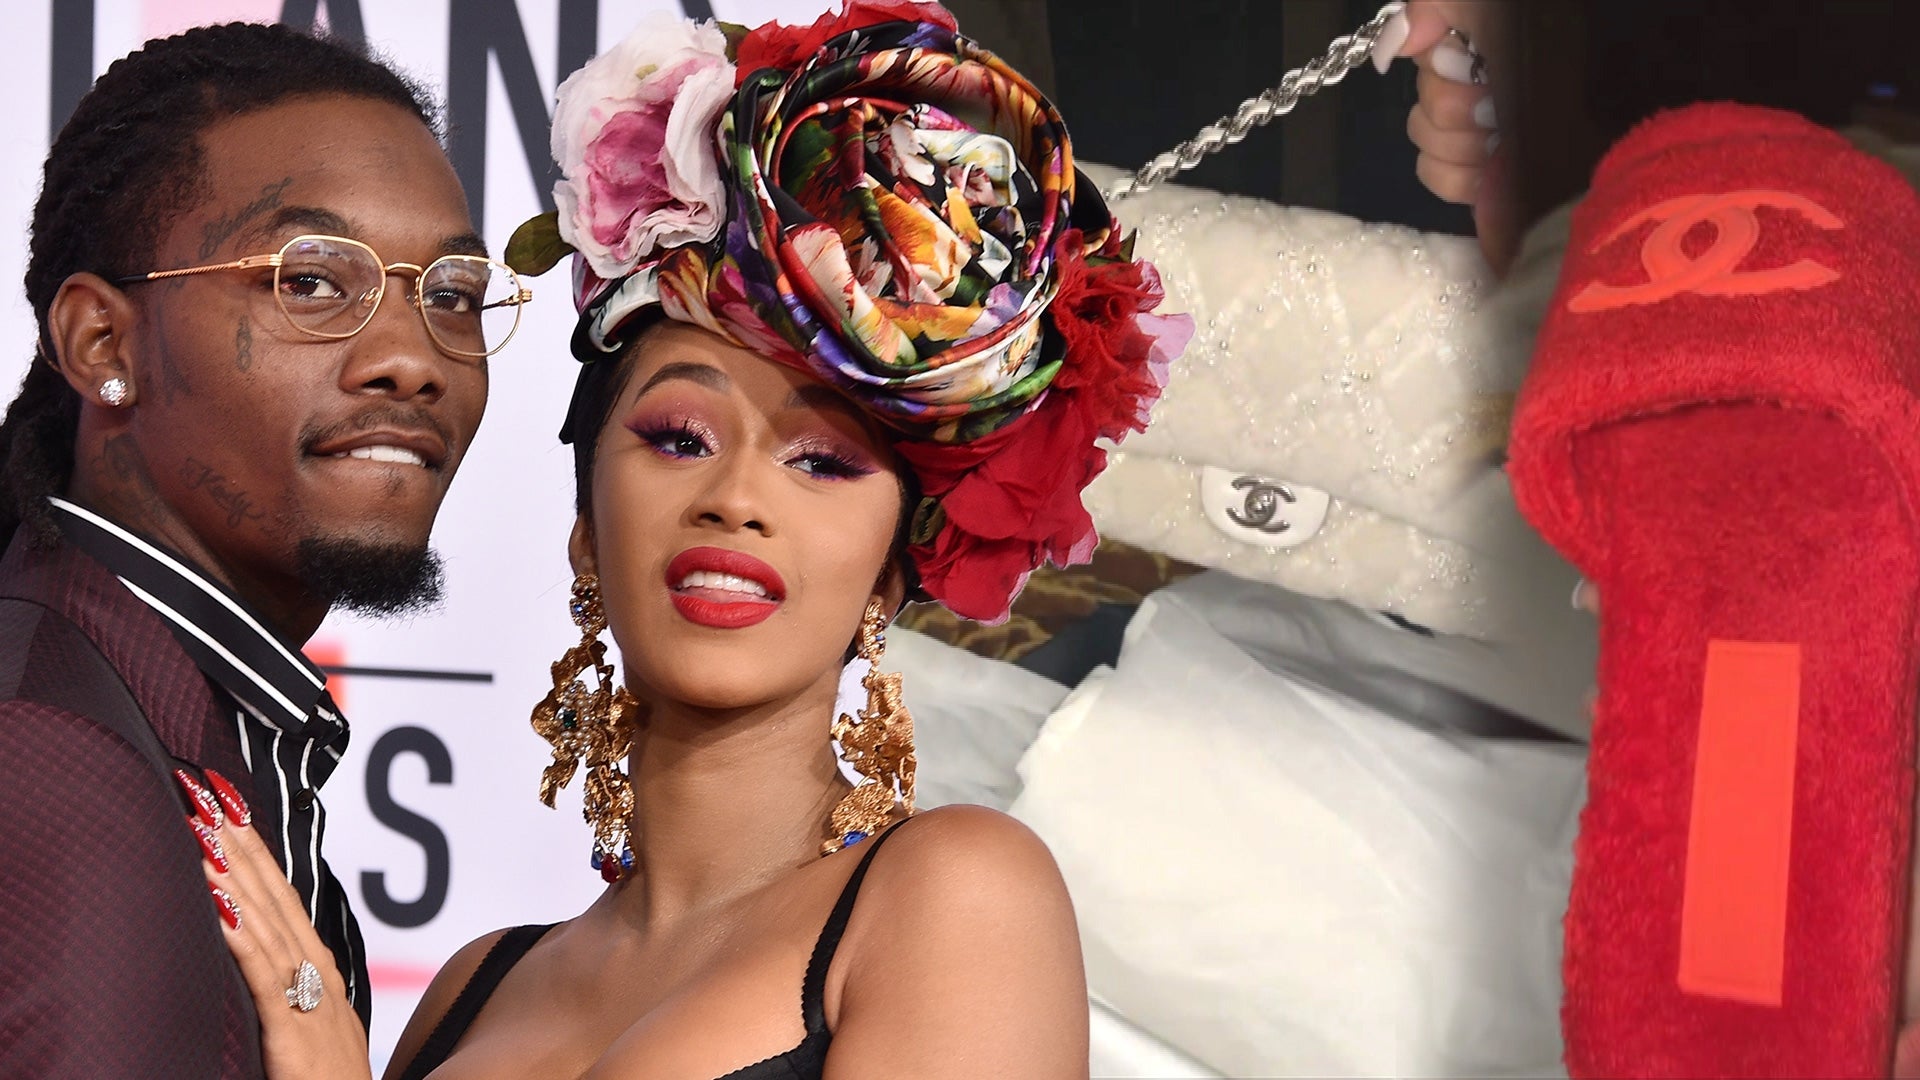 Cardi B steals the show at Chanel